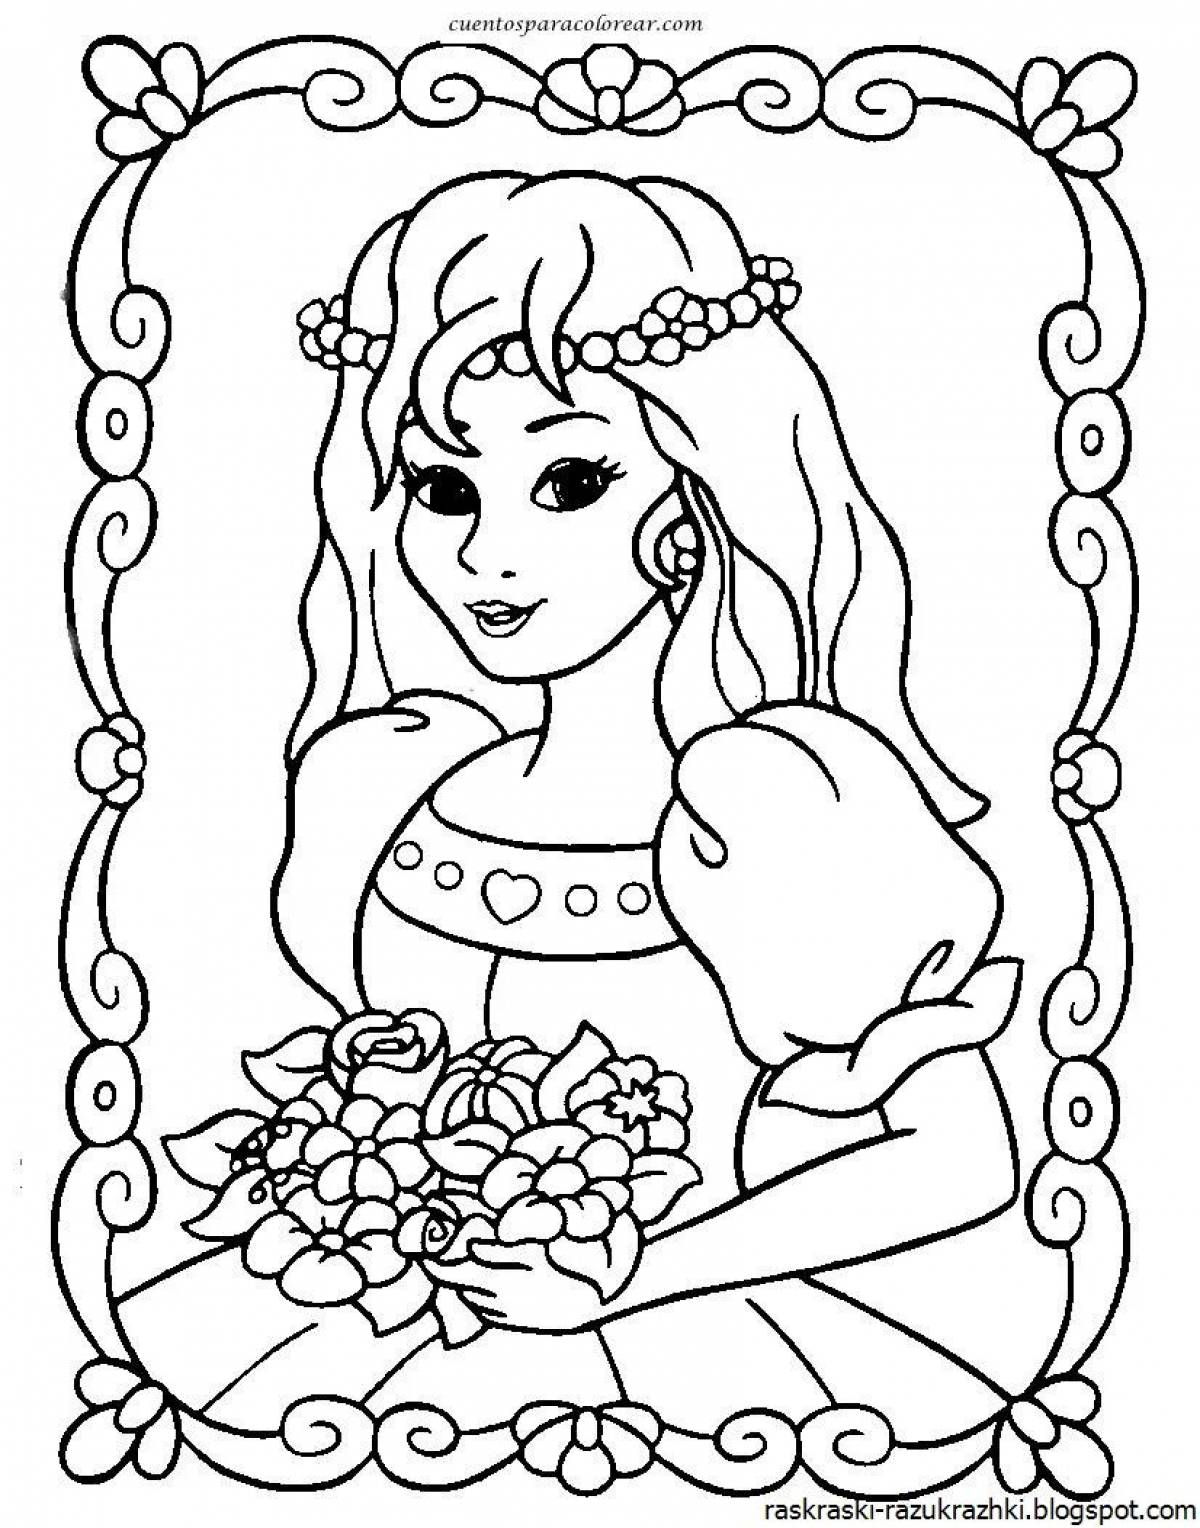 Glitter princess coloring for girls 7 years old